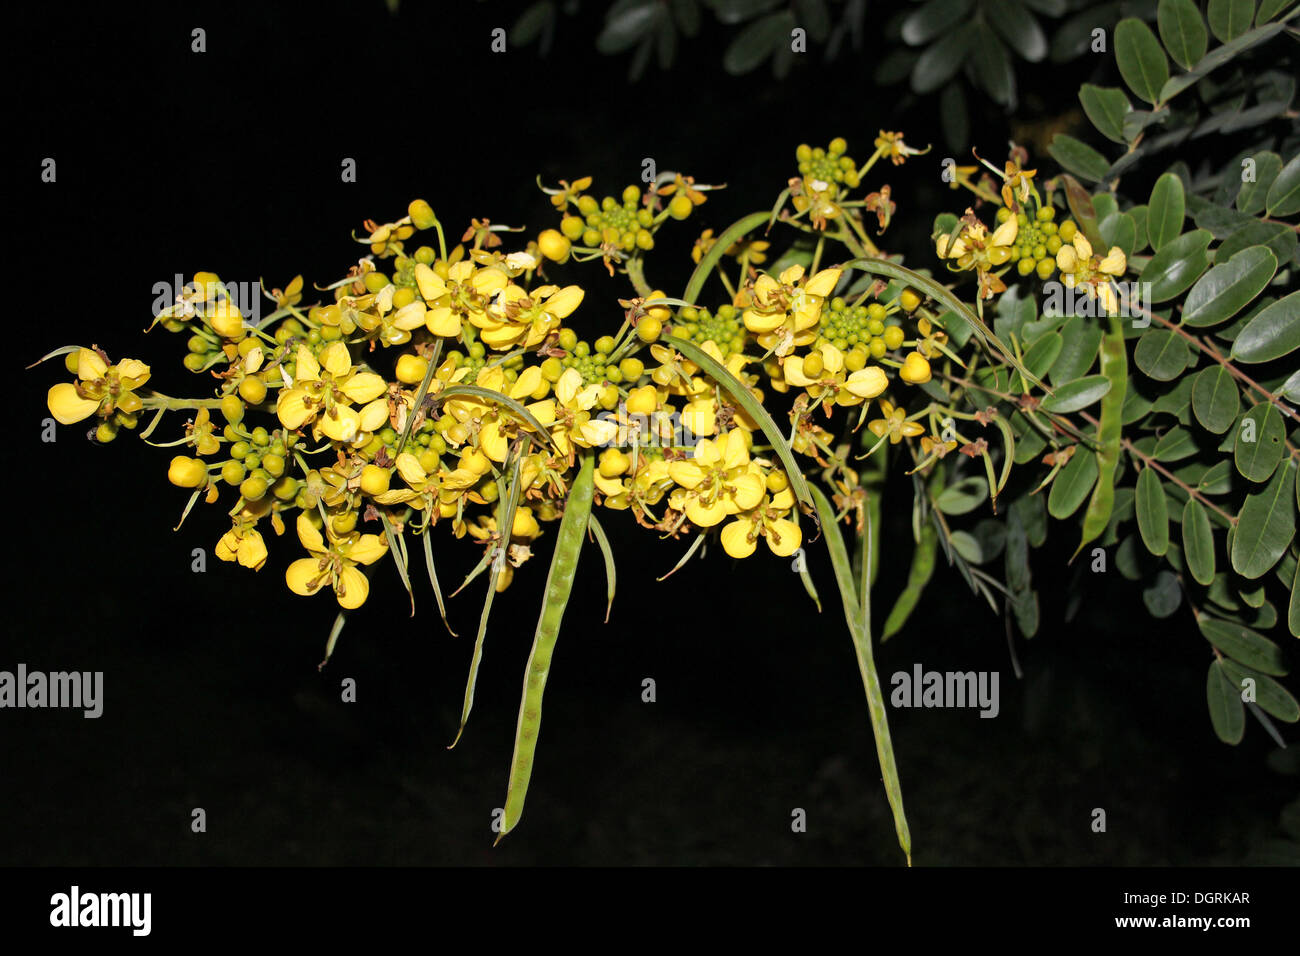 Yellow Acacia Flowers And Seed Pods At Night Stock Photo